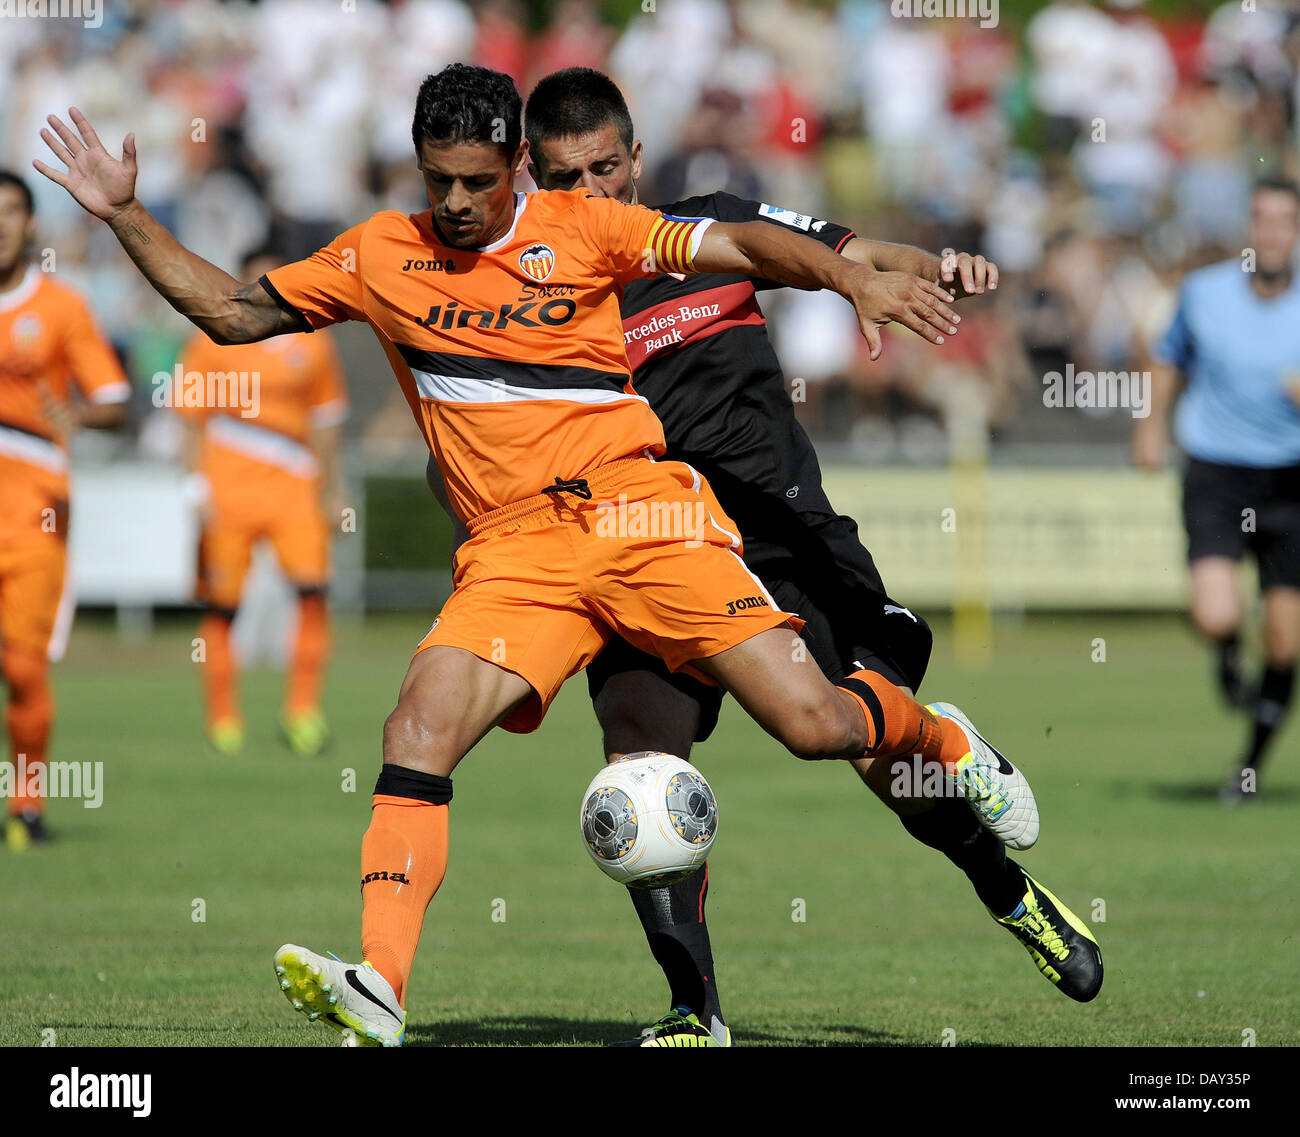 Ludwigsburg, Germany. 20th July, 2013. Stuttgart's Vedad Ibisevic (back) vies for the ball with Valencia's Ricardo Costa during the test match between VfB Stuttgart and FC Valencia at Ludwig-Jahn-Stadium in Ludwigsburg, Germany, 20 July 2013. Photo: DANIEL MAURER/dpa/Alamy Live News Stock Photo